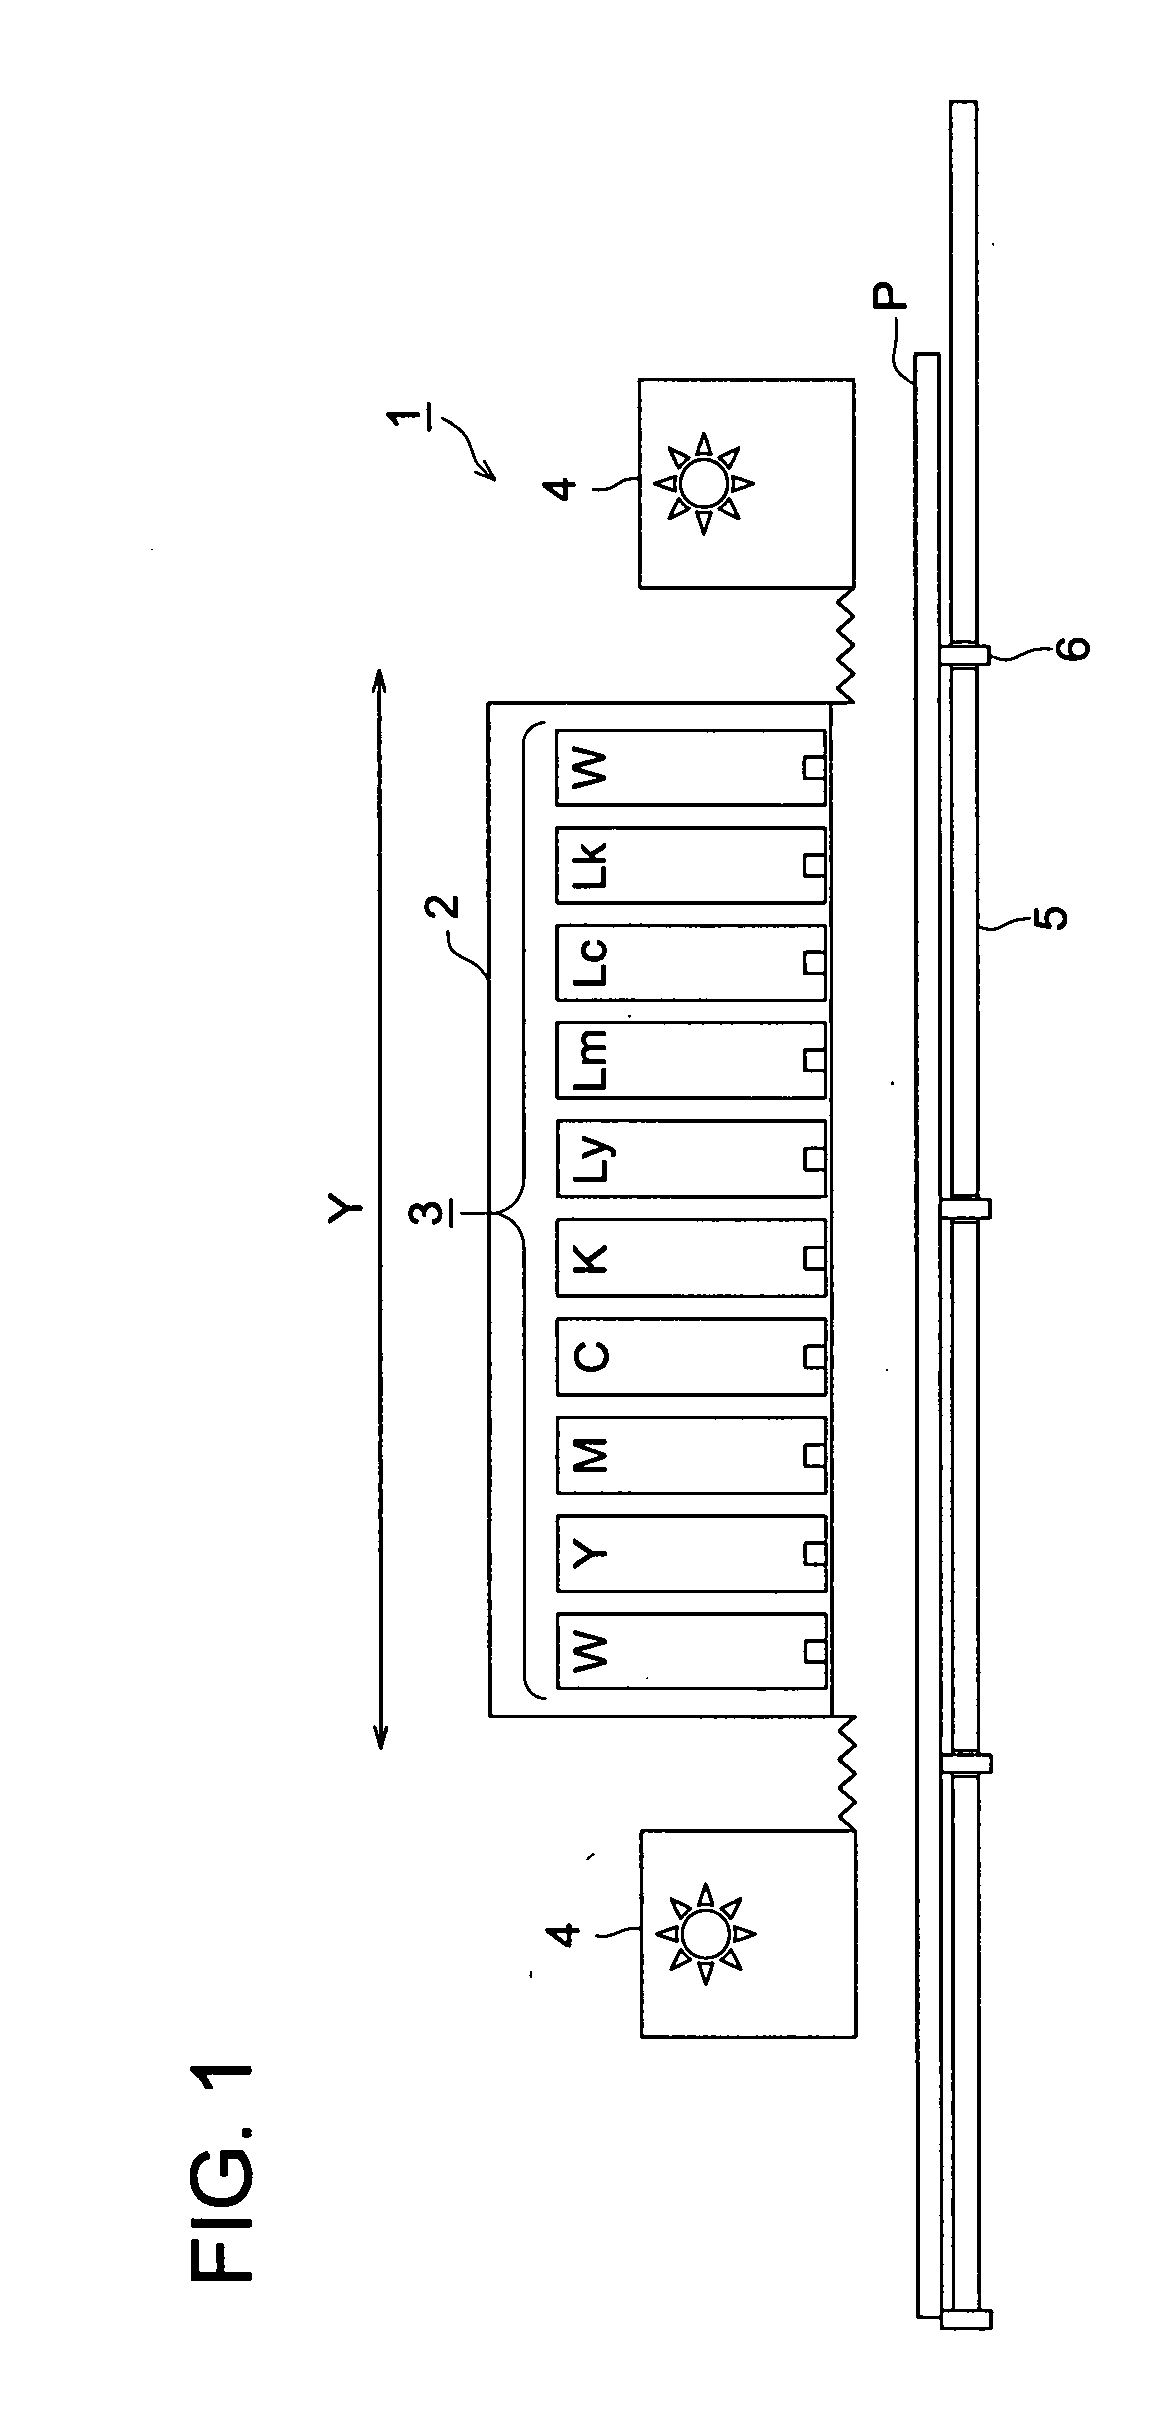 Image Recording Method and Image Recording Apparatus Employing the Same